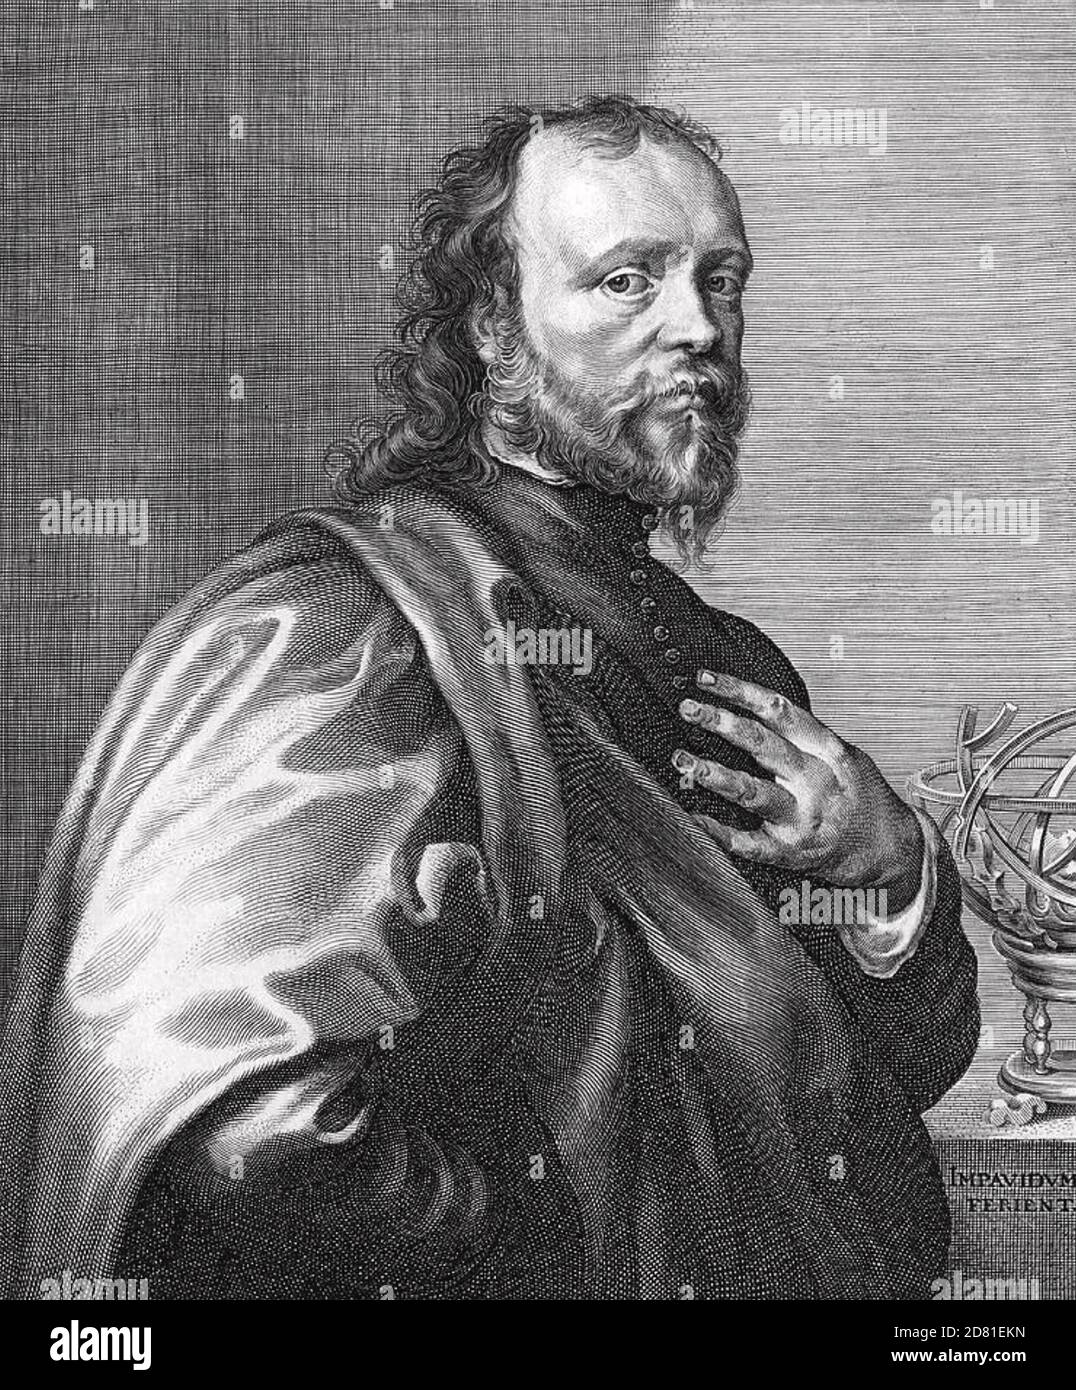 KENELM DIGBY (1603-1665) English courtier, diplomat, astrologer, Stock Photo